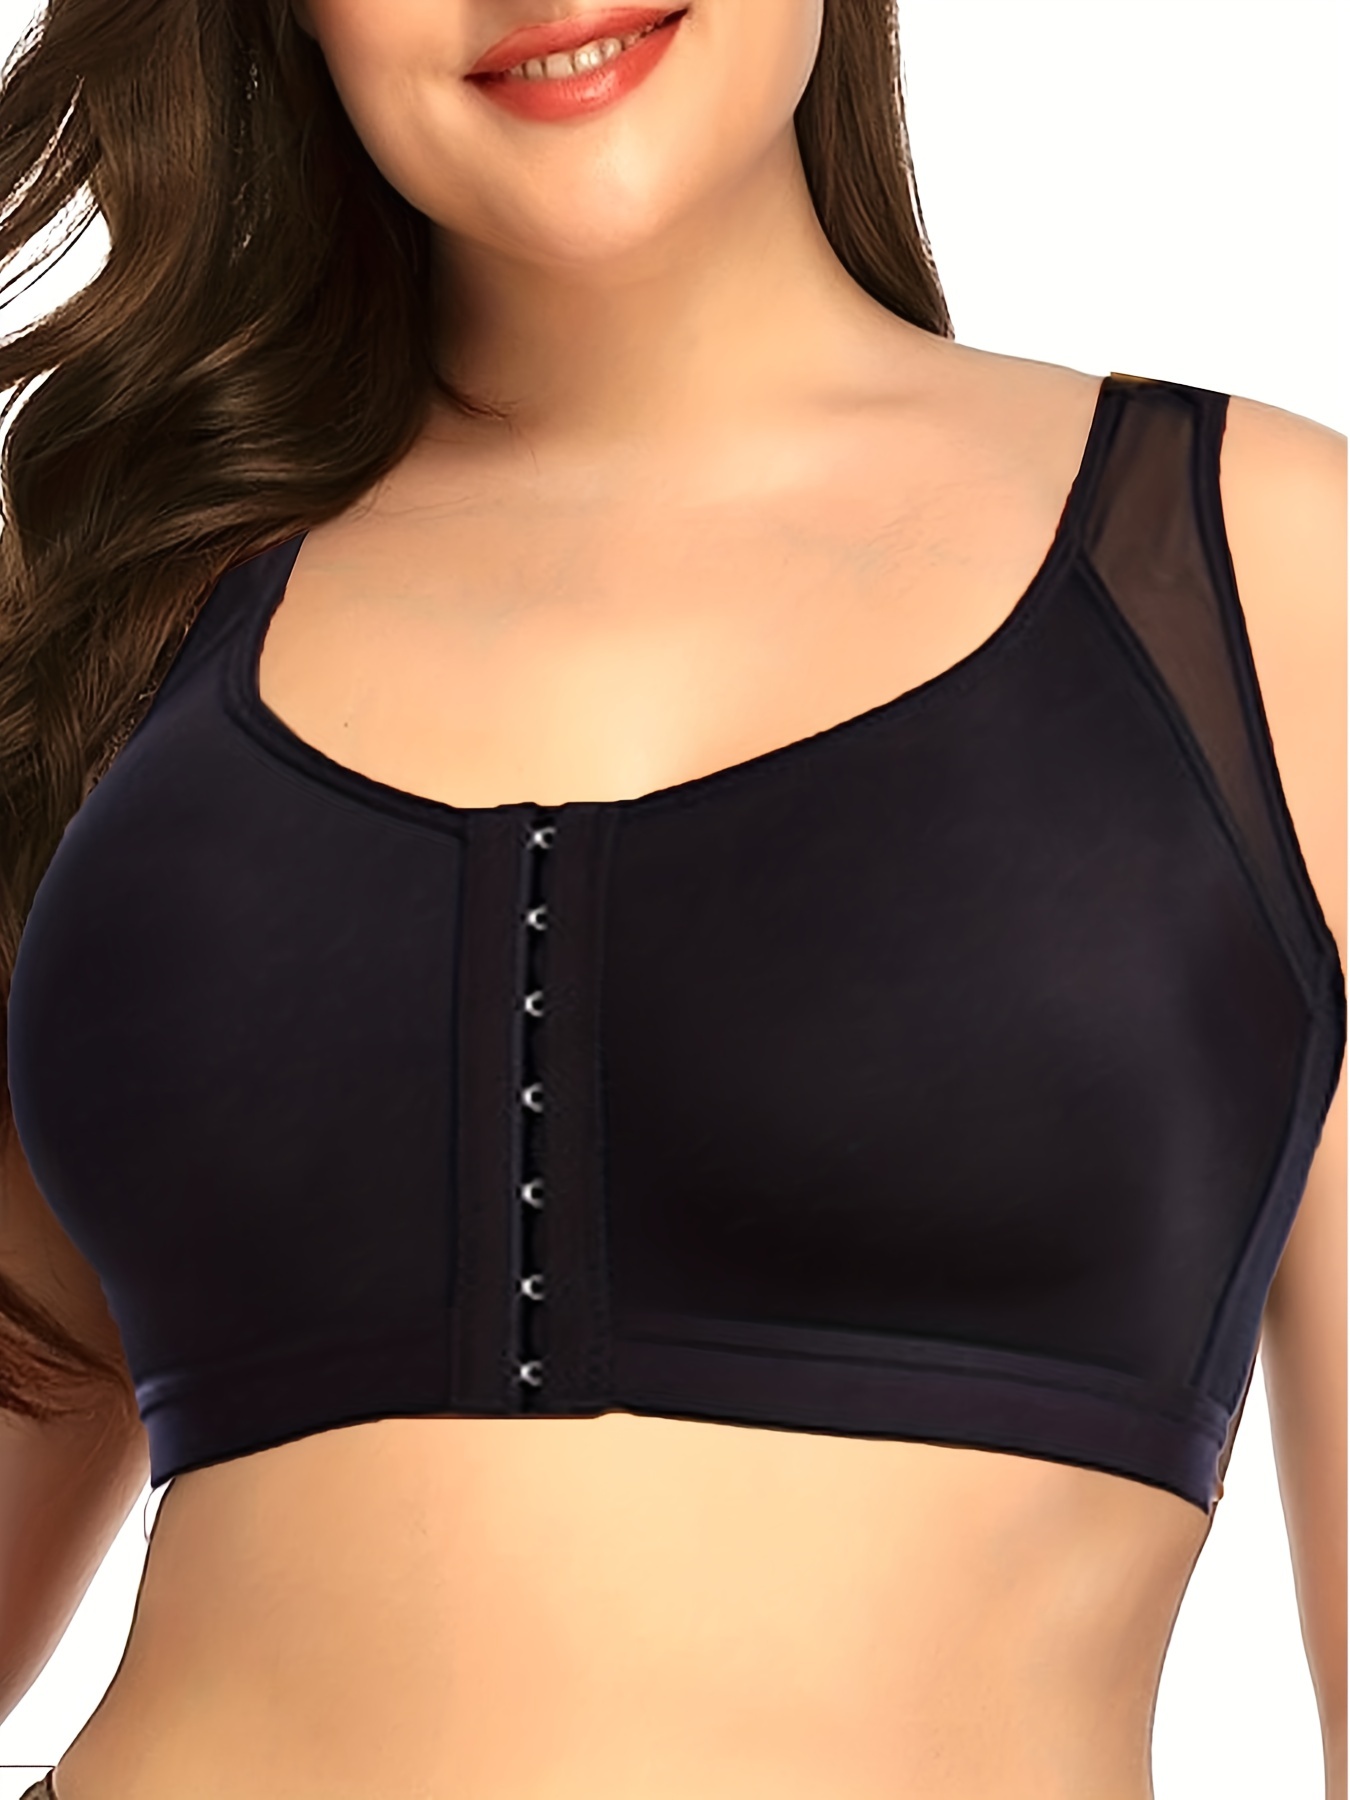 Post-Surgical Wireless Bra with Front Closure